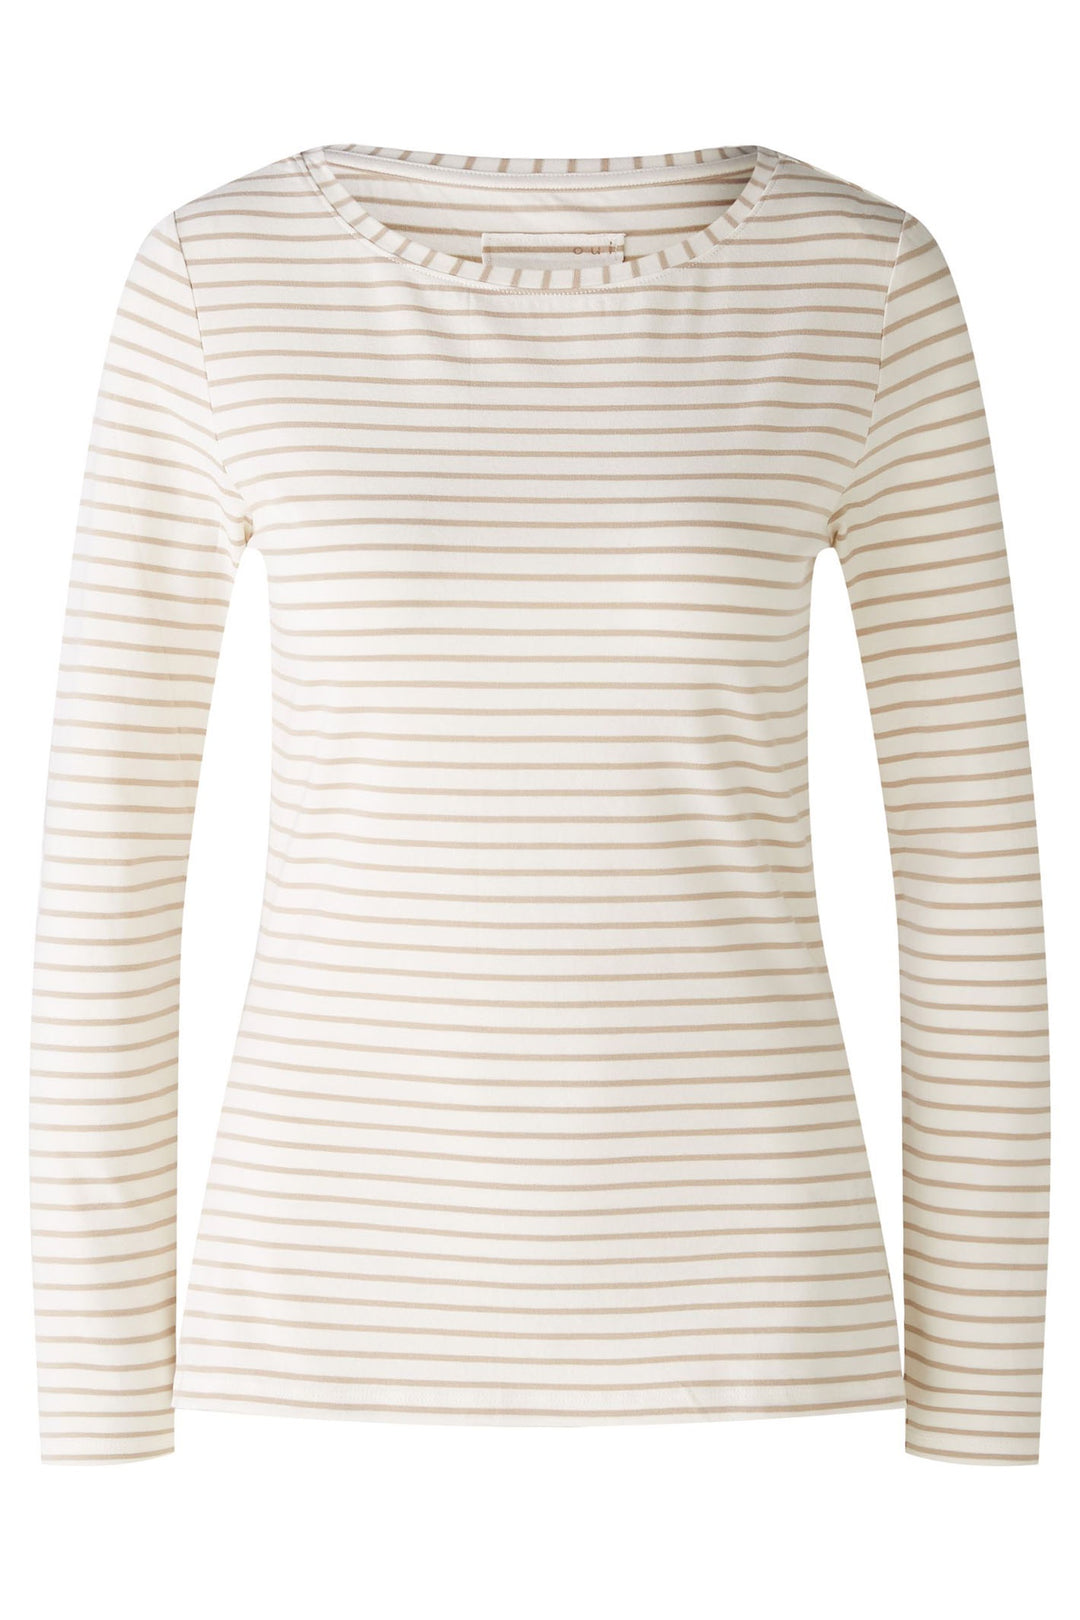 Oui 88220 Sumiko Camel Taupe White Striped Long Sleeve Top - Dotique